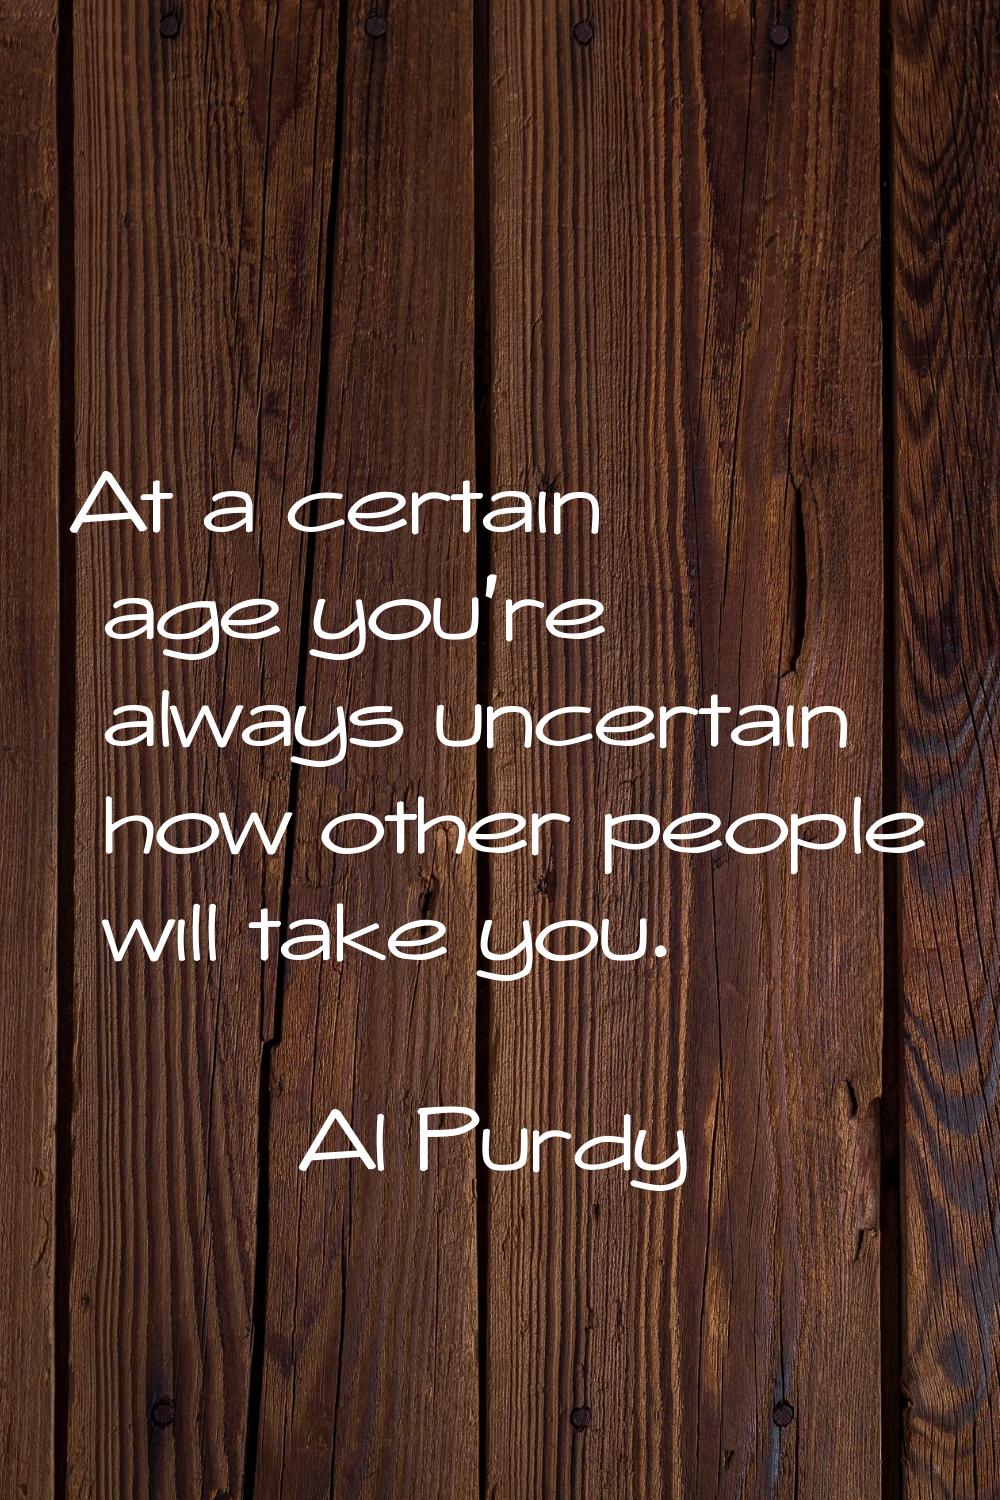 At a certain age you're always uncertain how other people will take you.